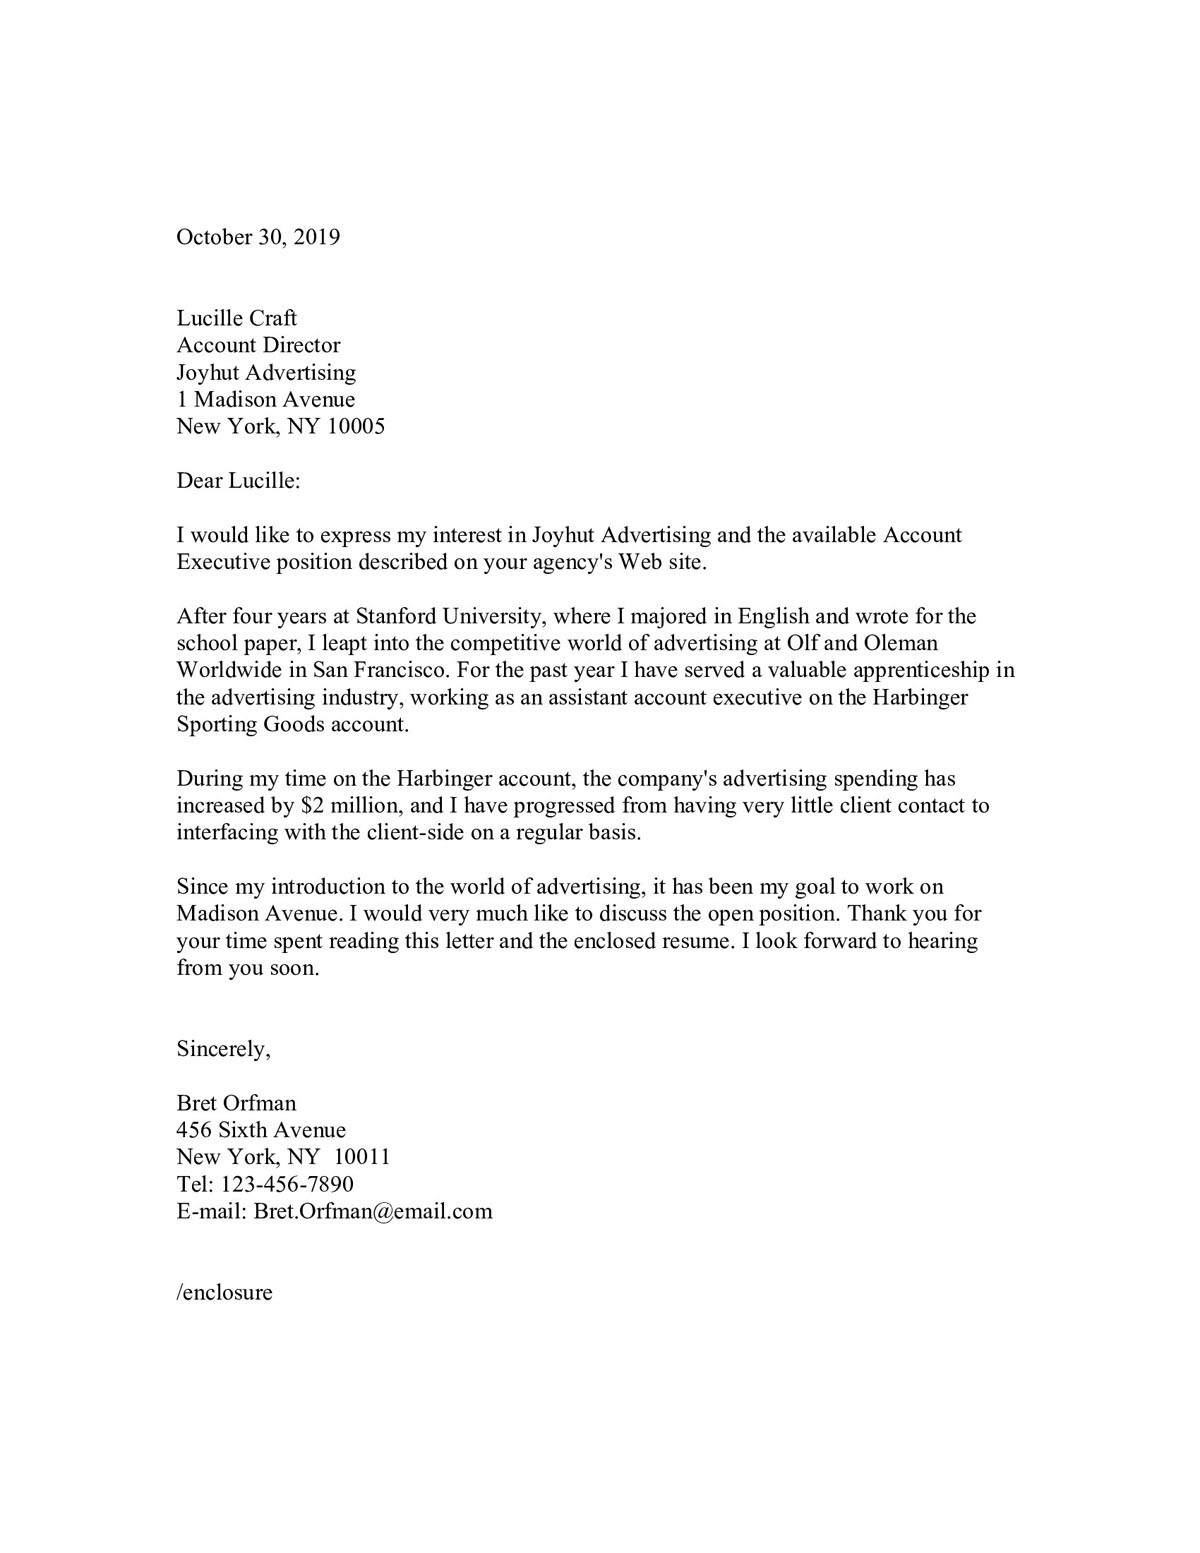 cover letter samples examples